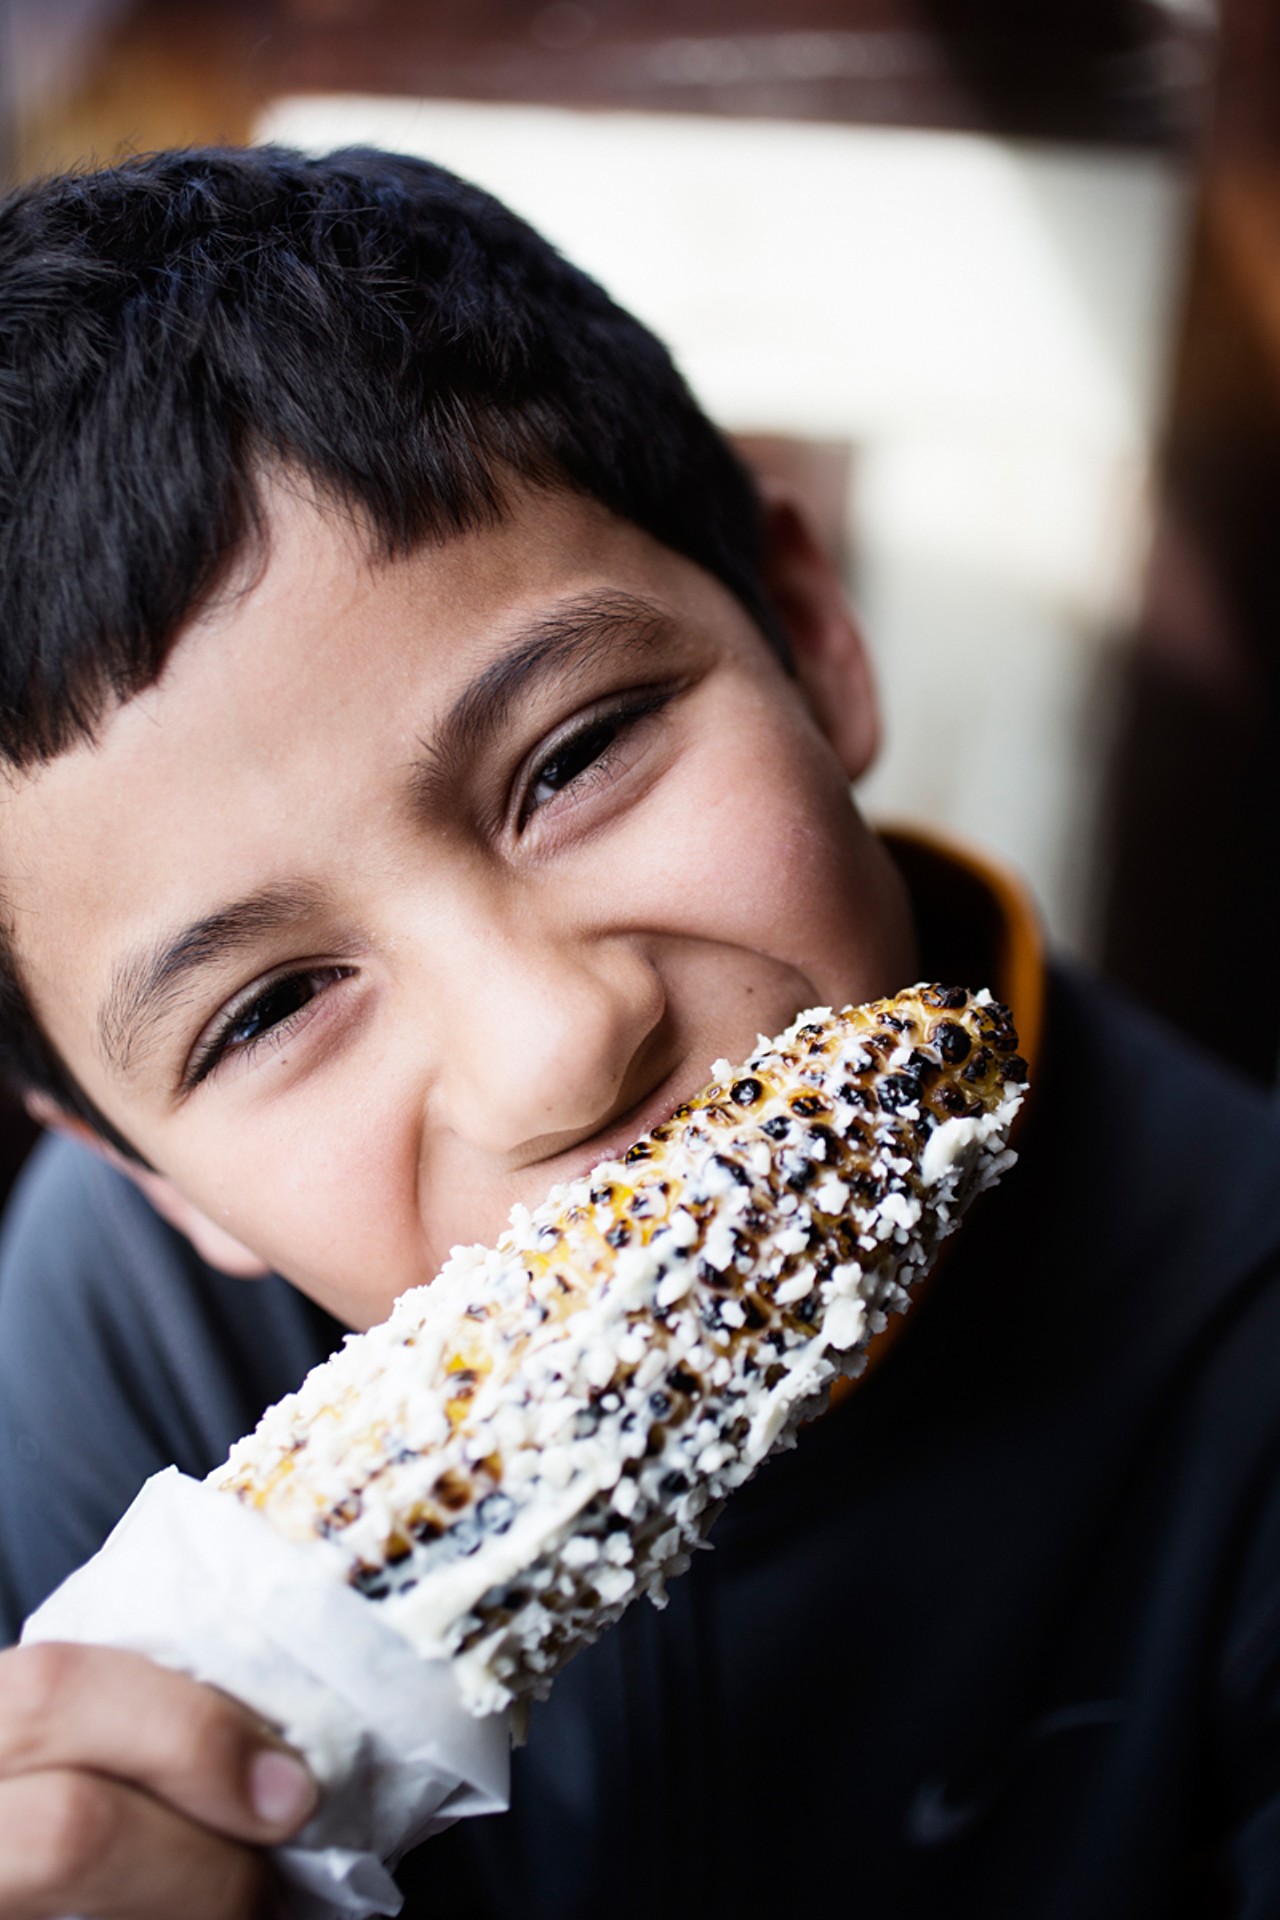 Owner and chef Jason Tilford's ten-year-old son, Julian, eating some roasted street corn.